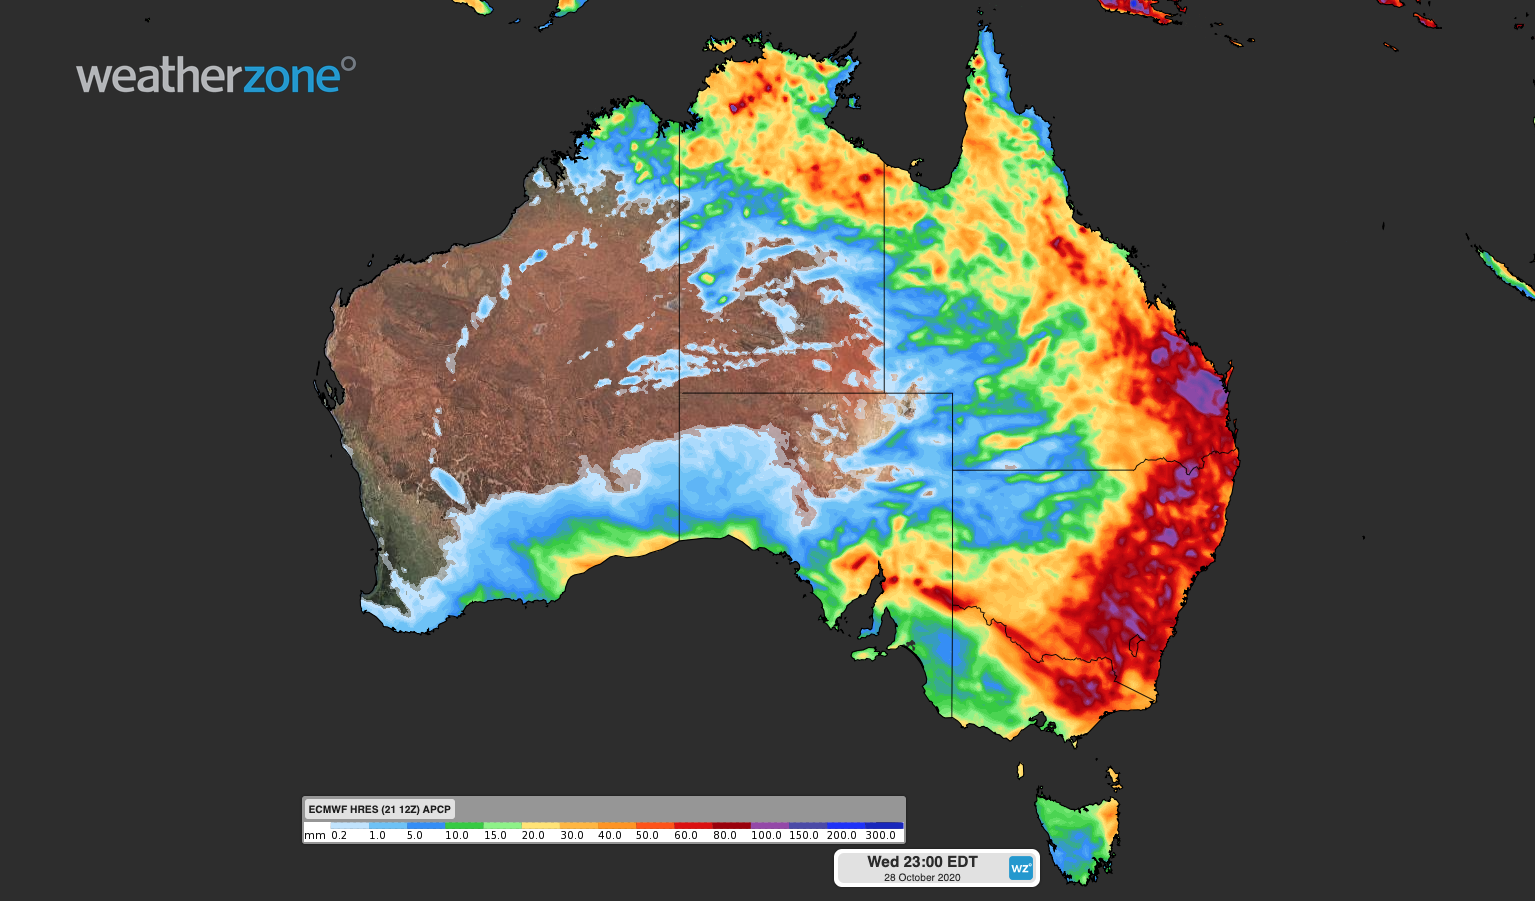 Days of rain and storms in Sydney, Melbourne, Brisbane and Canberra